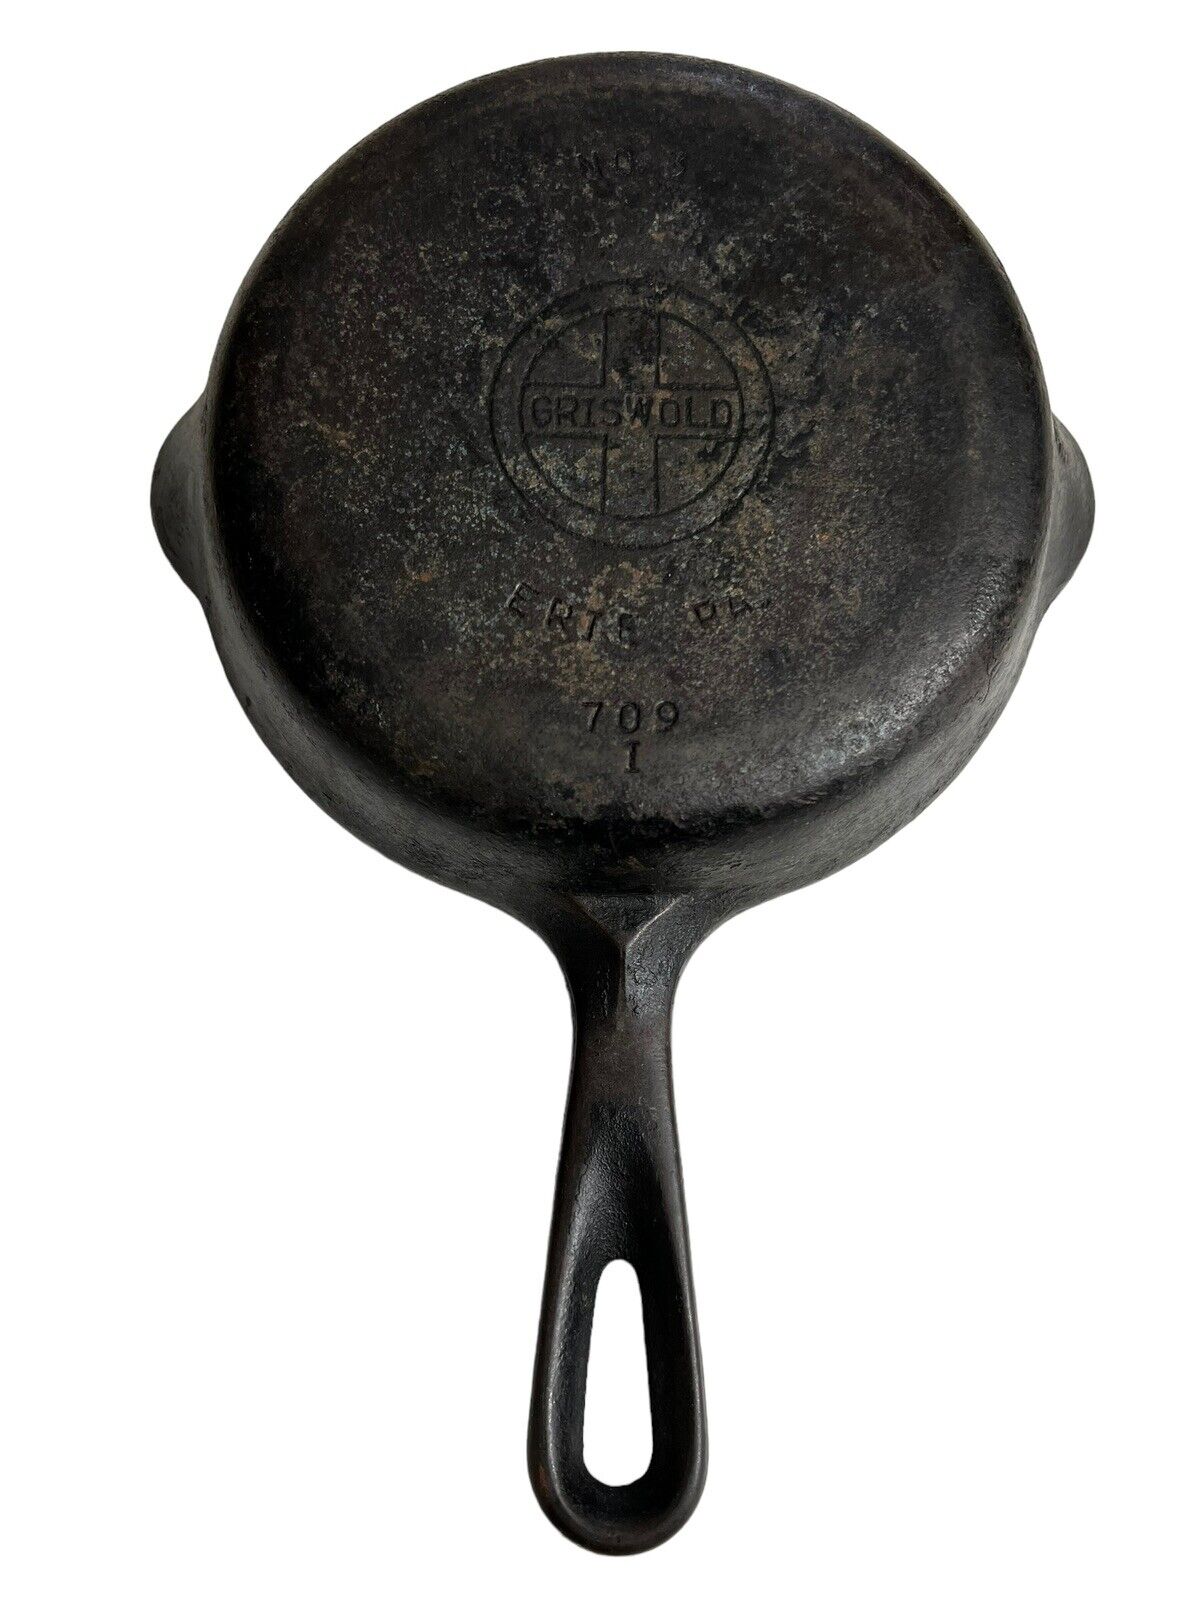 Griswold Cast Iron Skillet No. 3, Small Block Logo, Erie, PA., 709 I